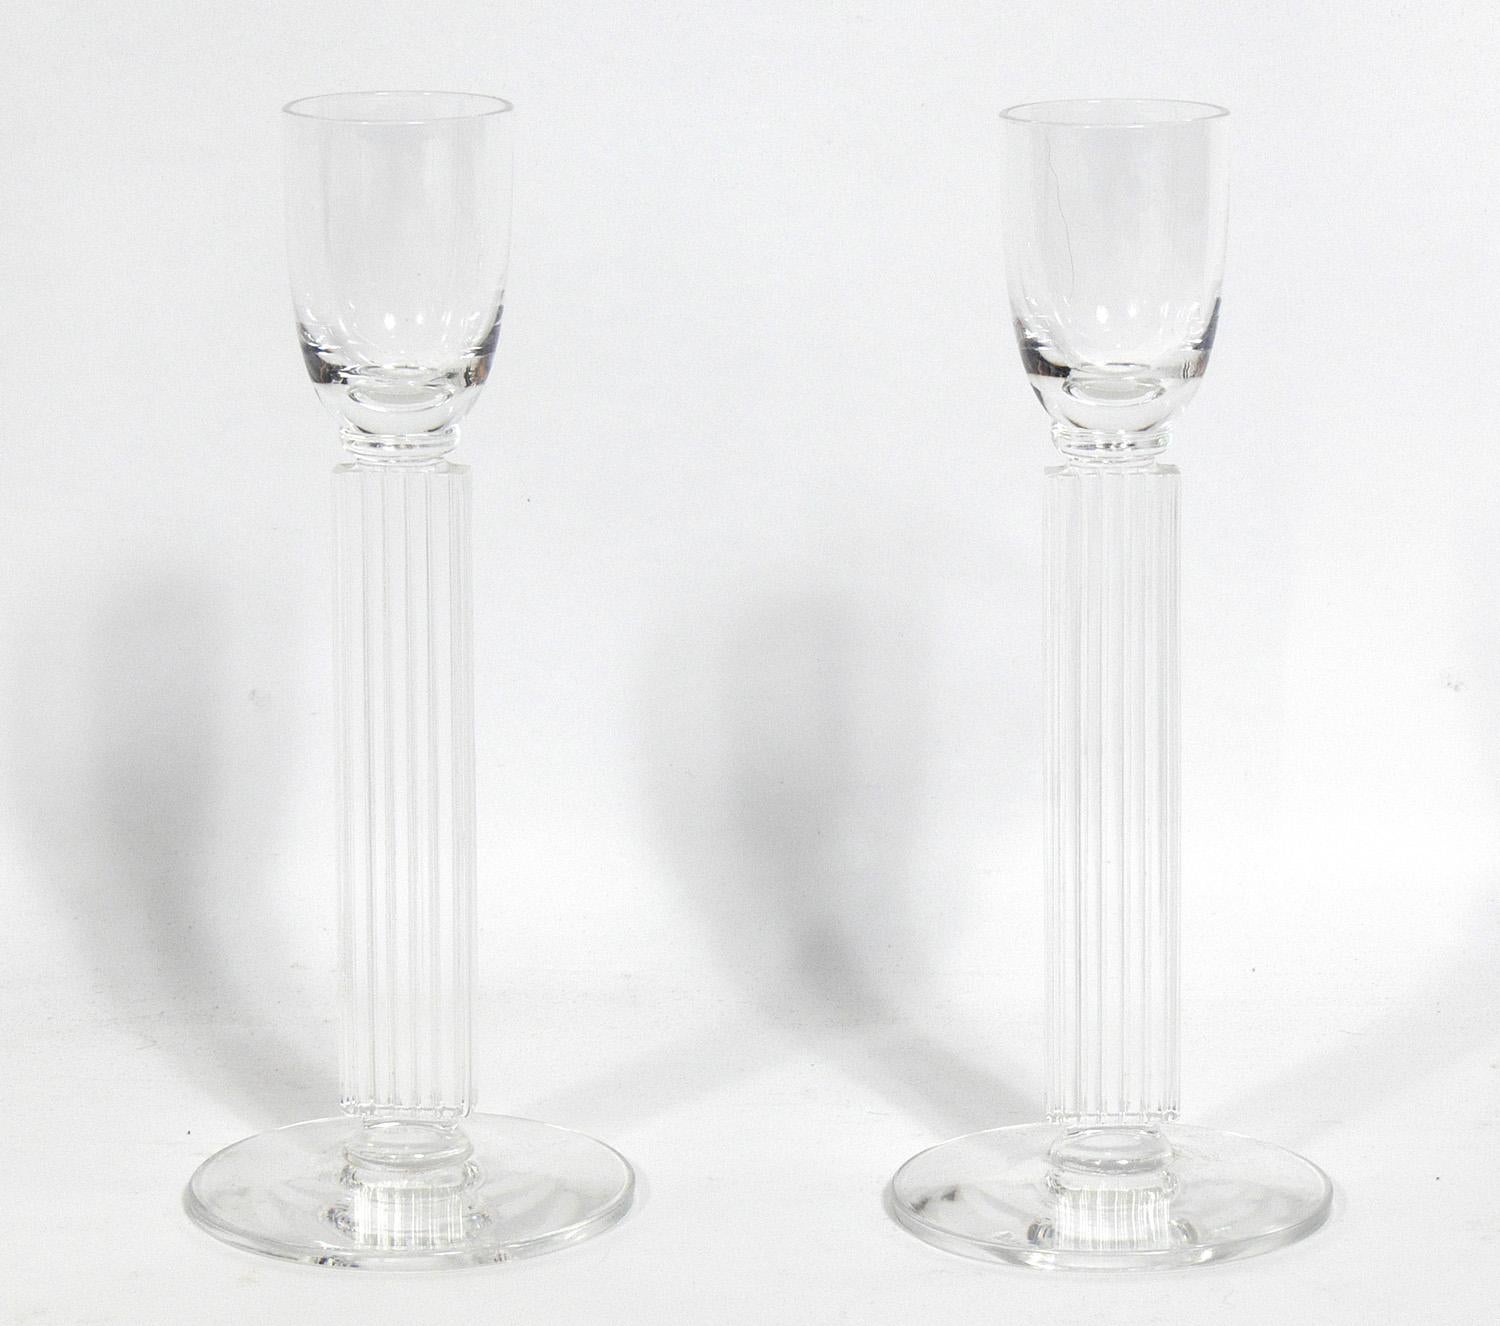 Pair of embassy crystal cordial glasses, designed by Walter Dorwin Teague for Libby Glass Company, circa 1939.